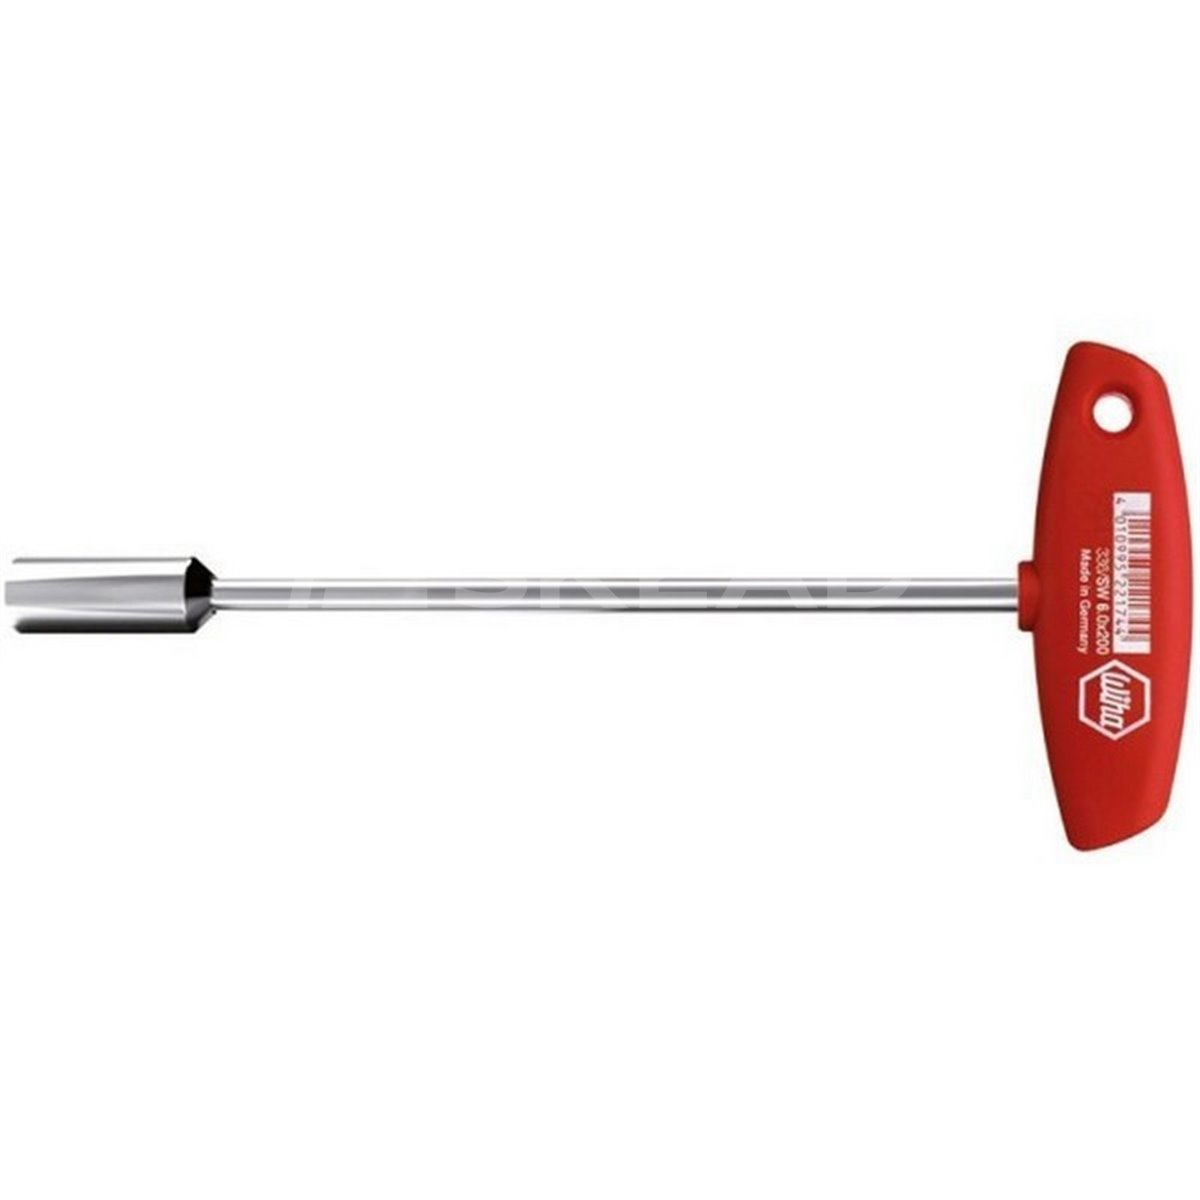 Socket wrench with T-handle. Classic 336 6 200mm Wiha 00967.